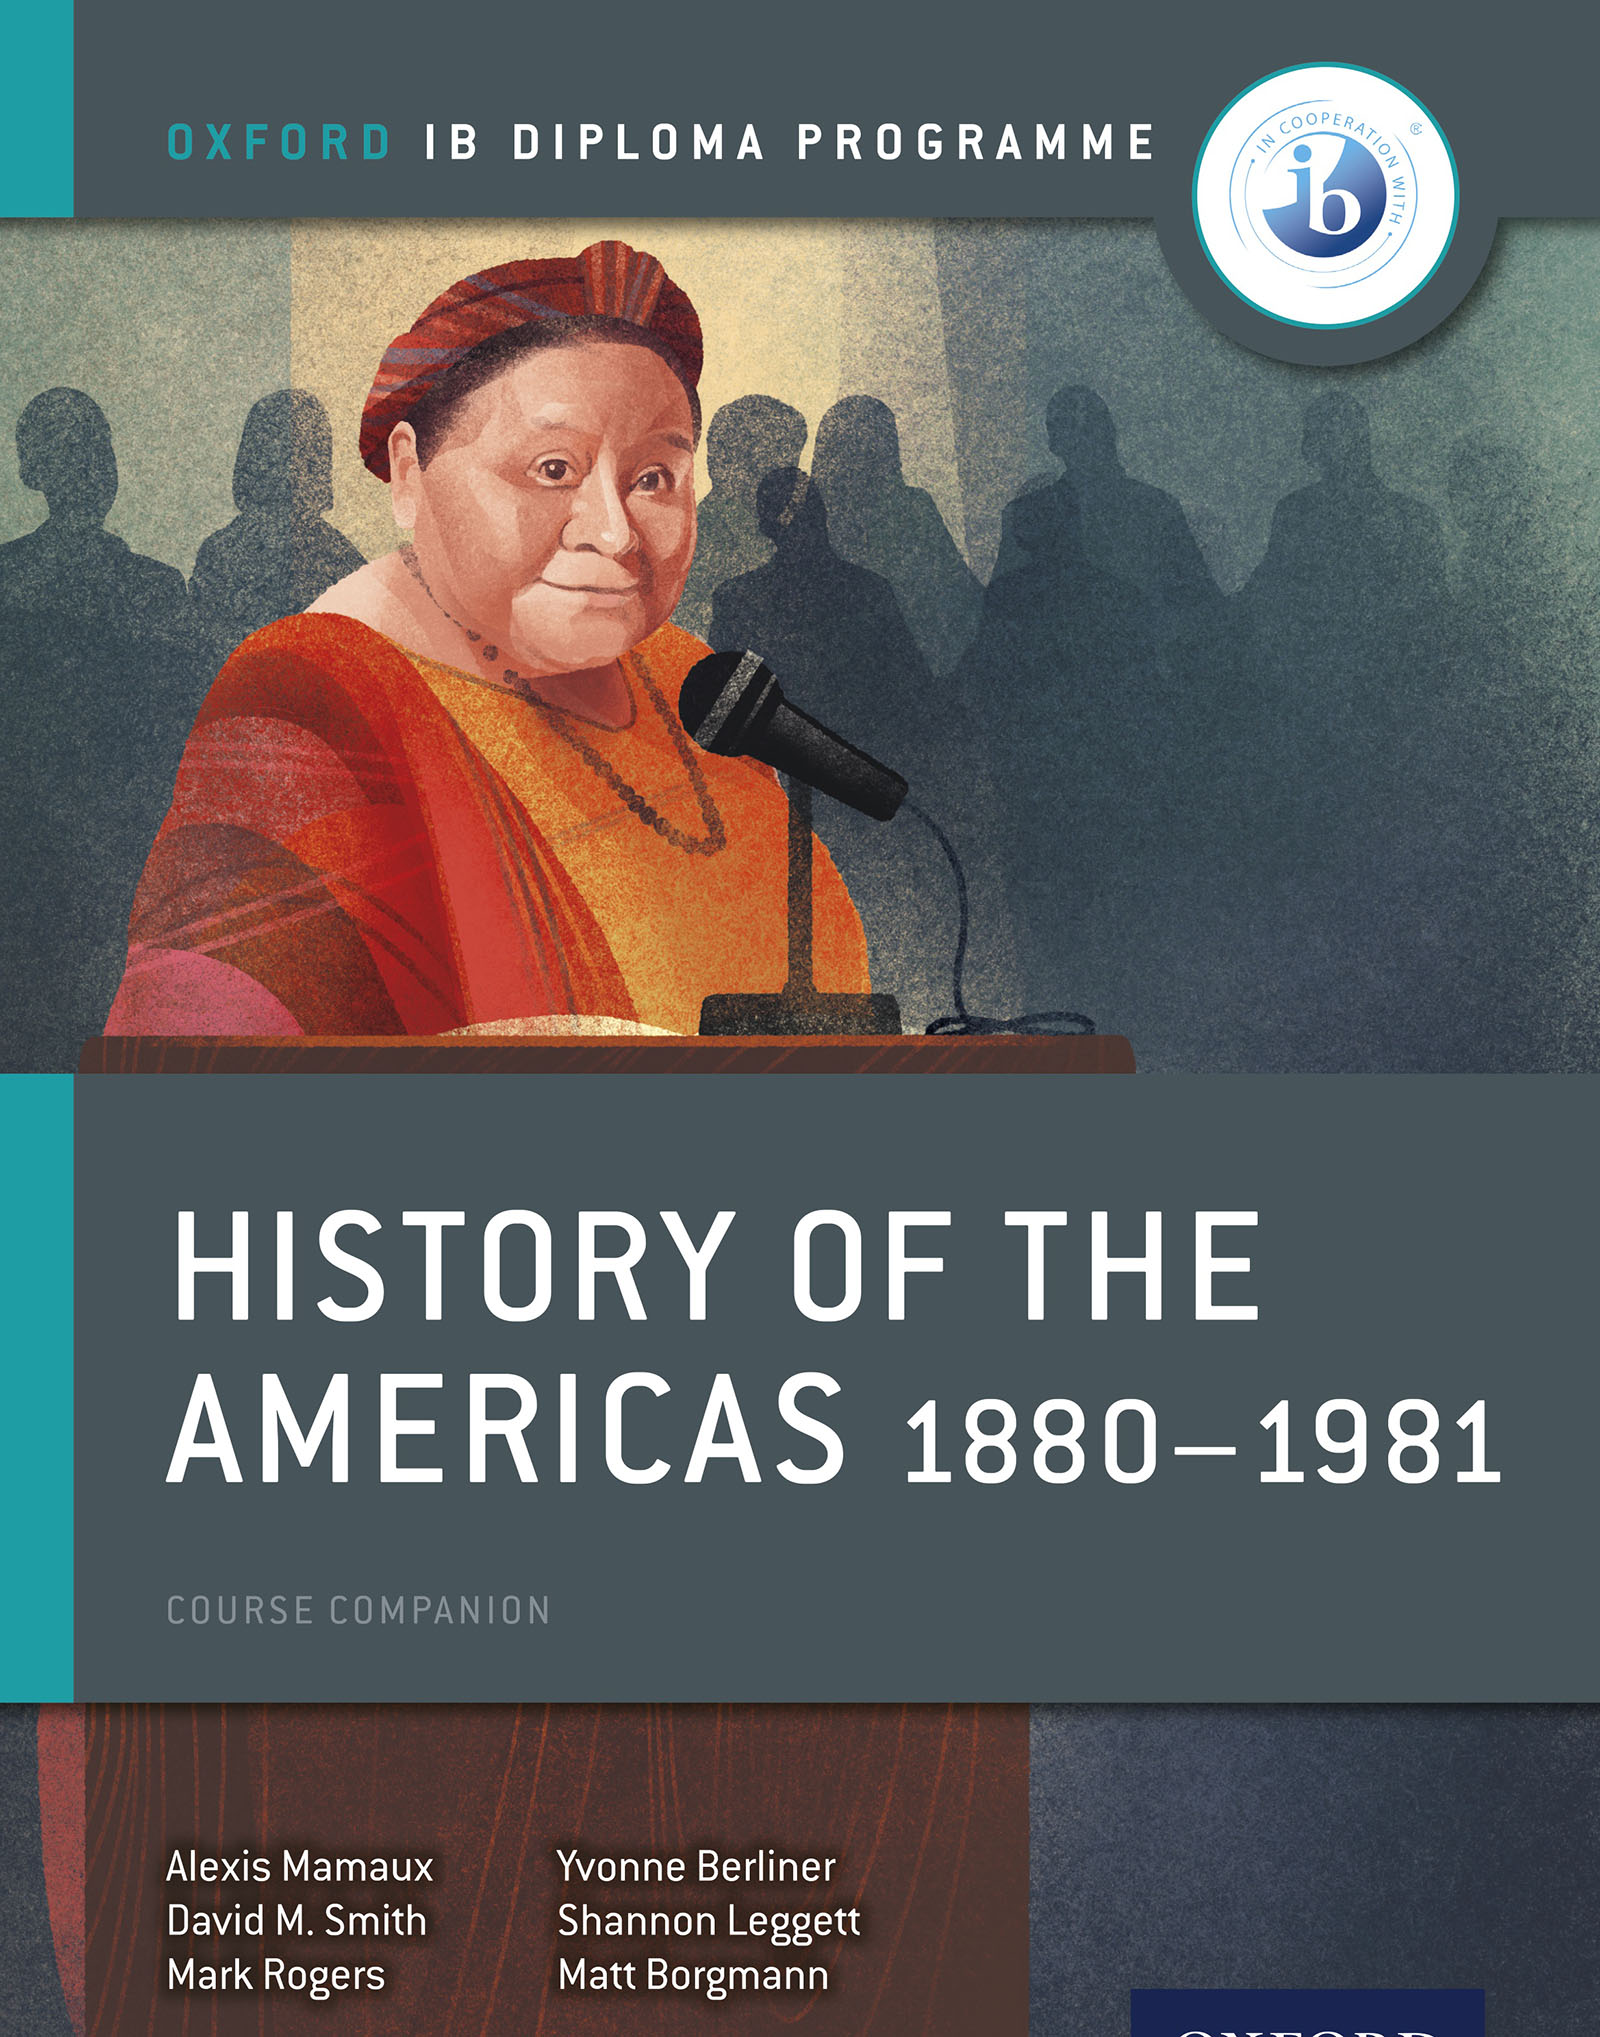 Oxford IB Diploma Programme: History of the Americas 1880-1981 Course Companion